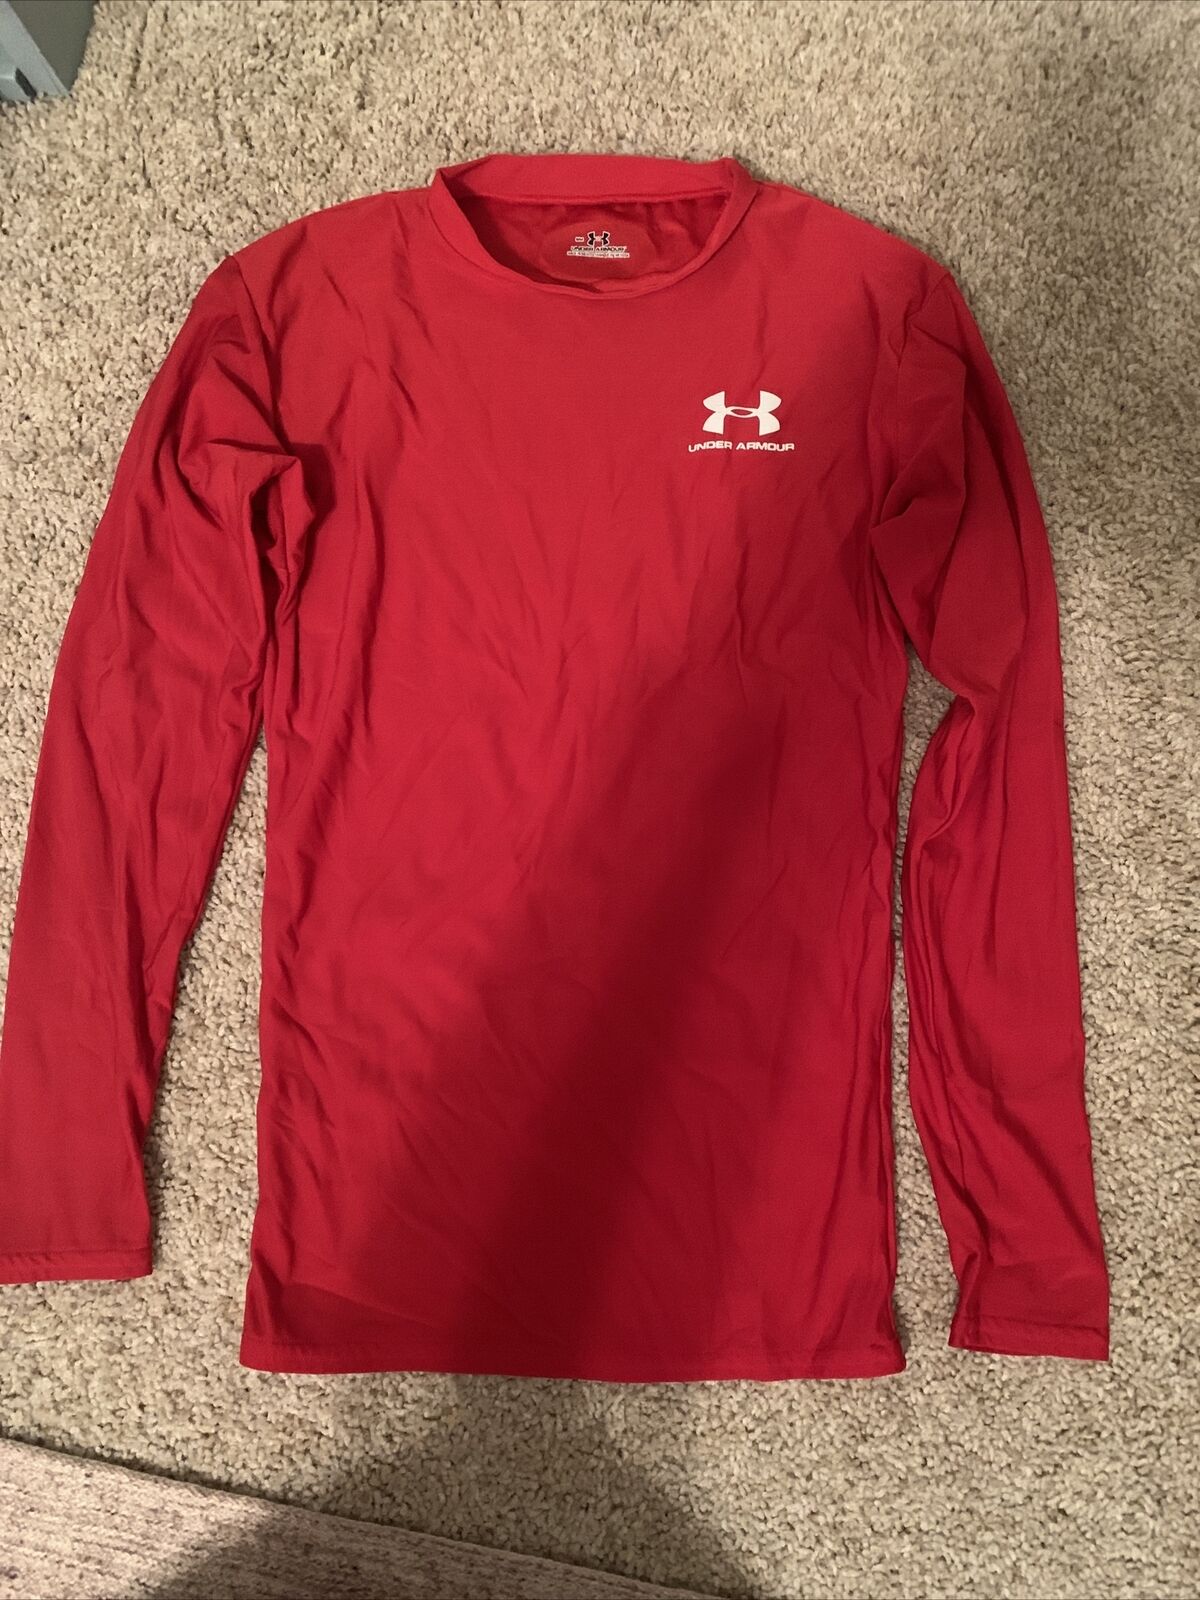 Under Armour Red Long Sleeve Compression Shirt Youth Small